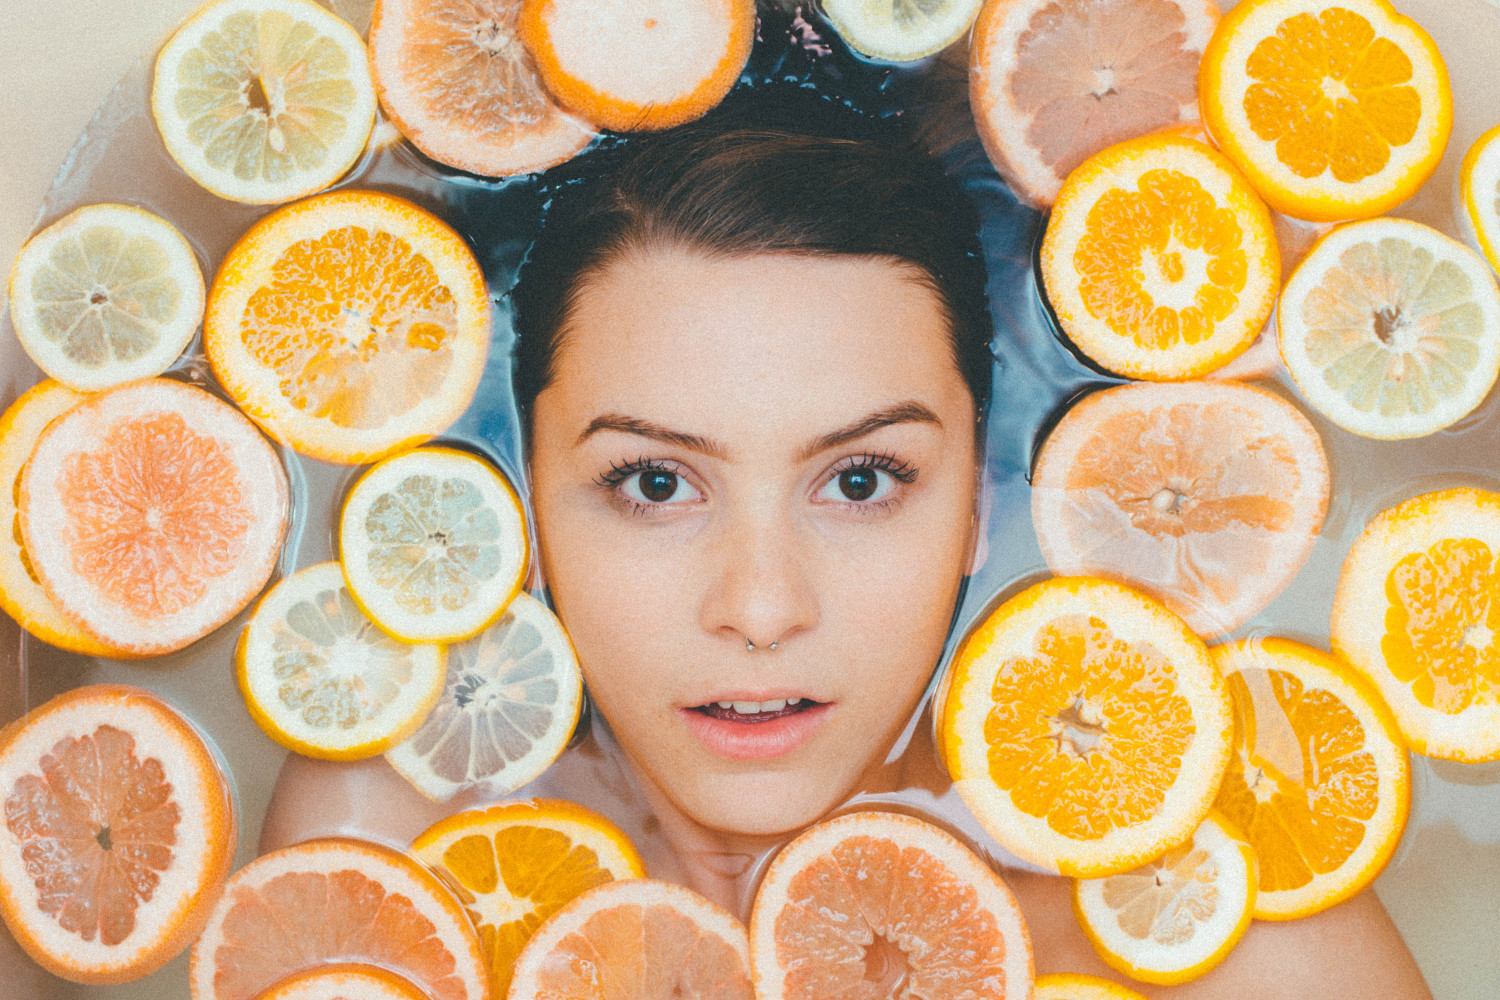 Woman's face surrounded by sliced lemons floating in water.